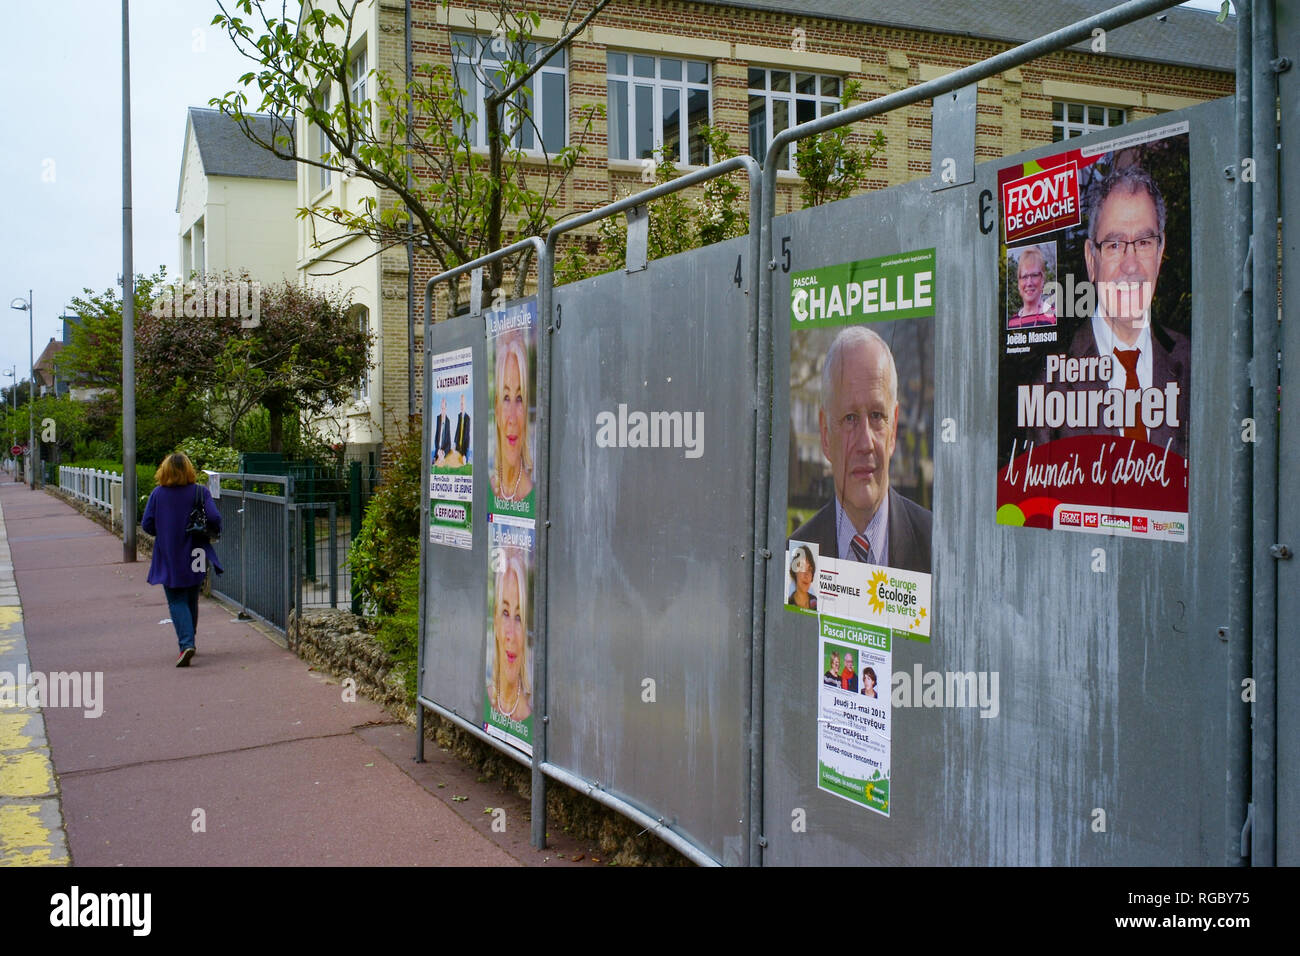 Political posters, Deauville, Normandy, France Stock Photo